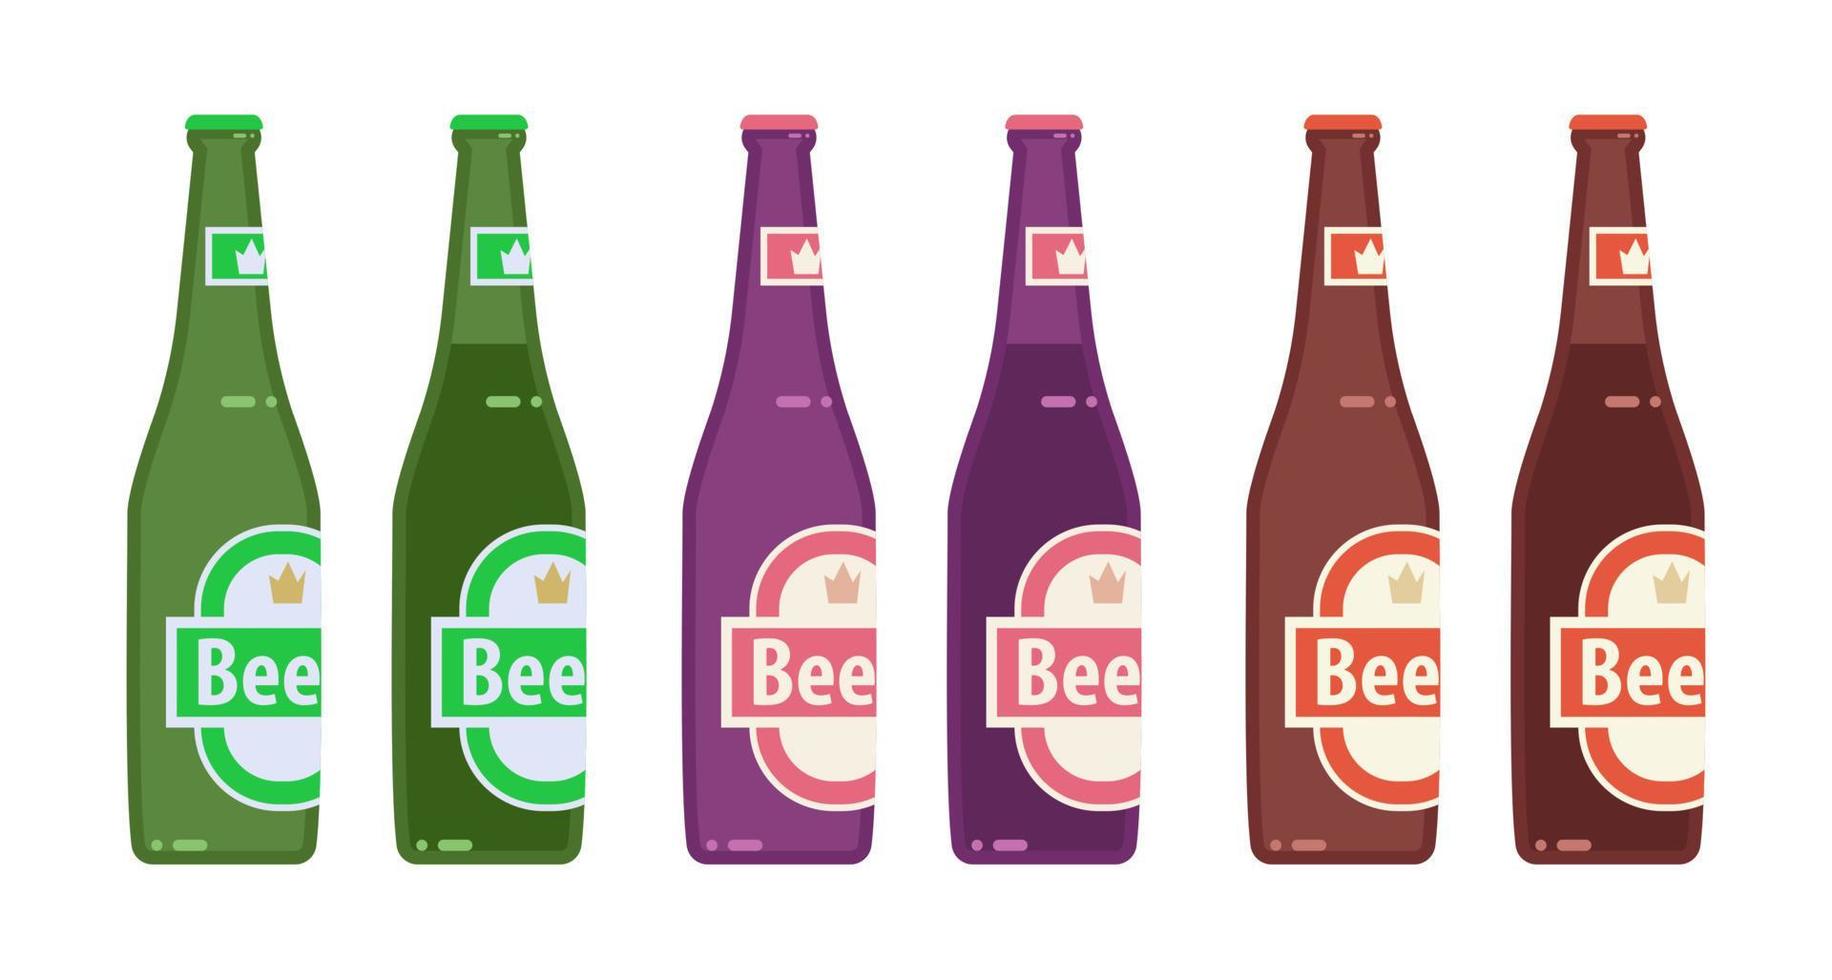 Set of flat style beer bottles isolated on white background for print and design. Vector illustration.